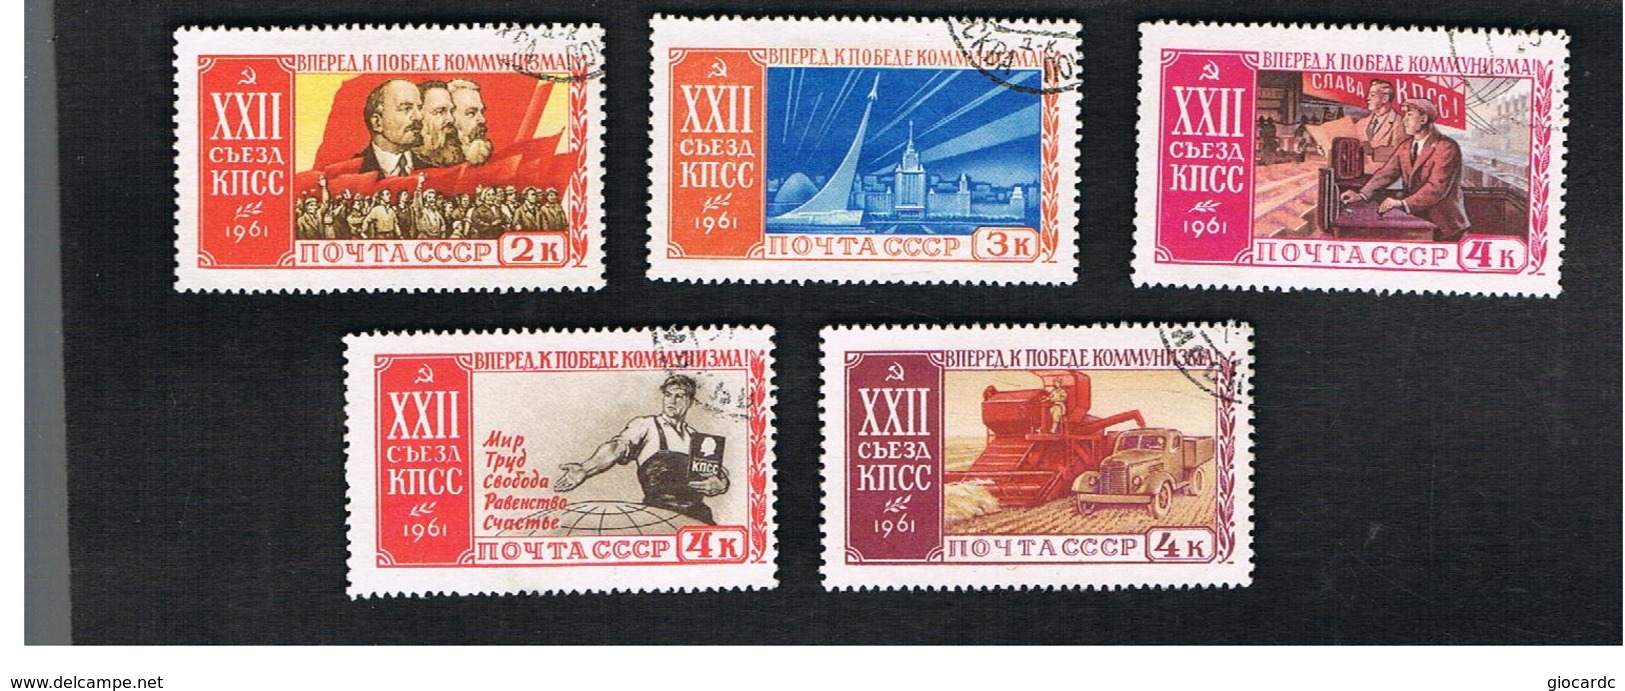 URSS  - SG 2626.2630  - 1961 COMMUNIST PARTY CONGRESS  (COMPLET SET OF 5)  - USED ° - RIF. CP - Used Stamps